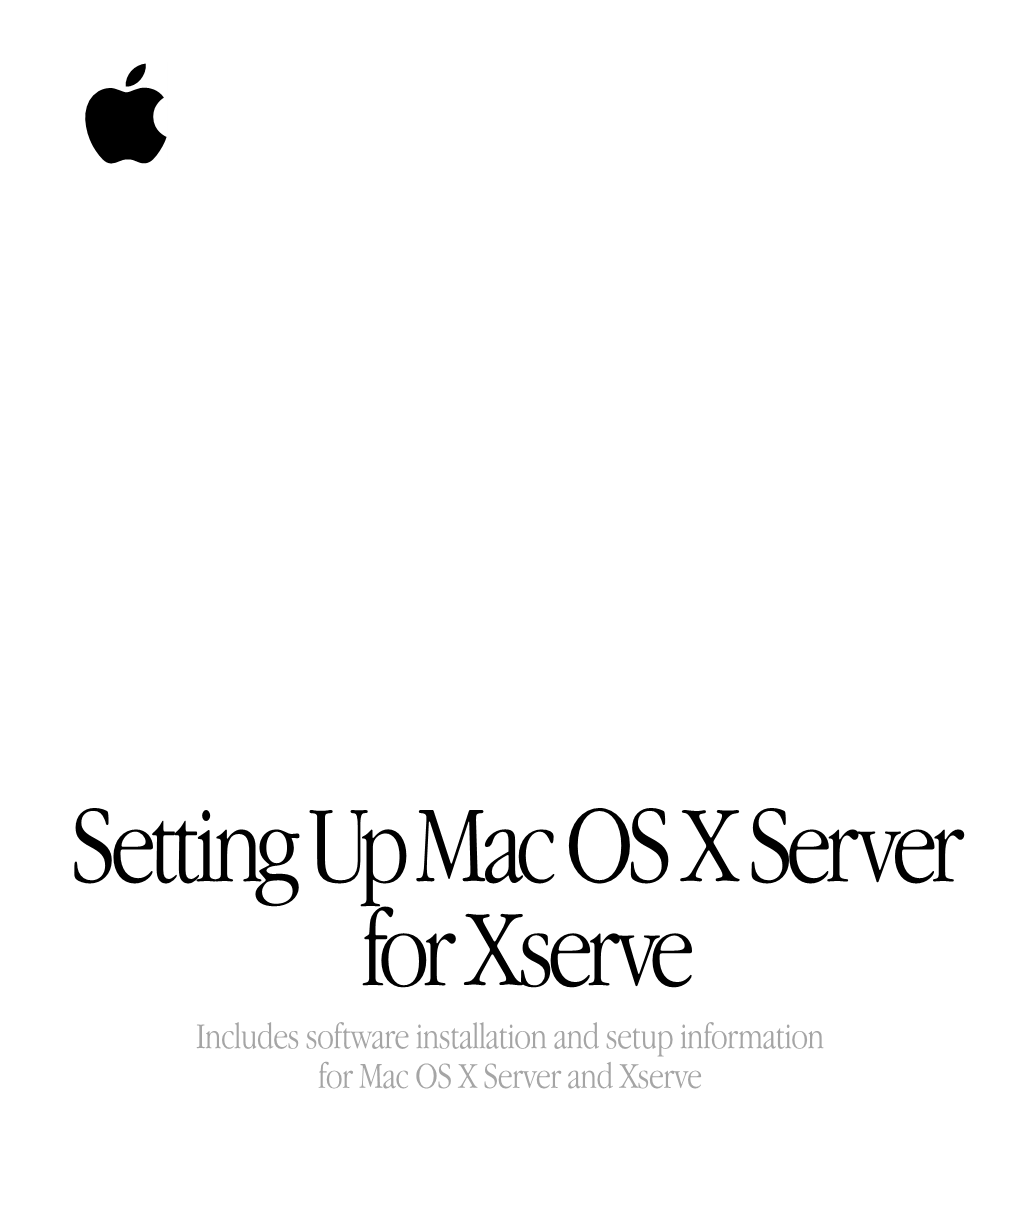 Setting up Mac OS X Server for Xserve Includes Software Installation and Setup Information for Mac OS X Server and Xserve